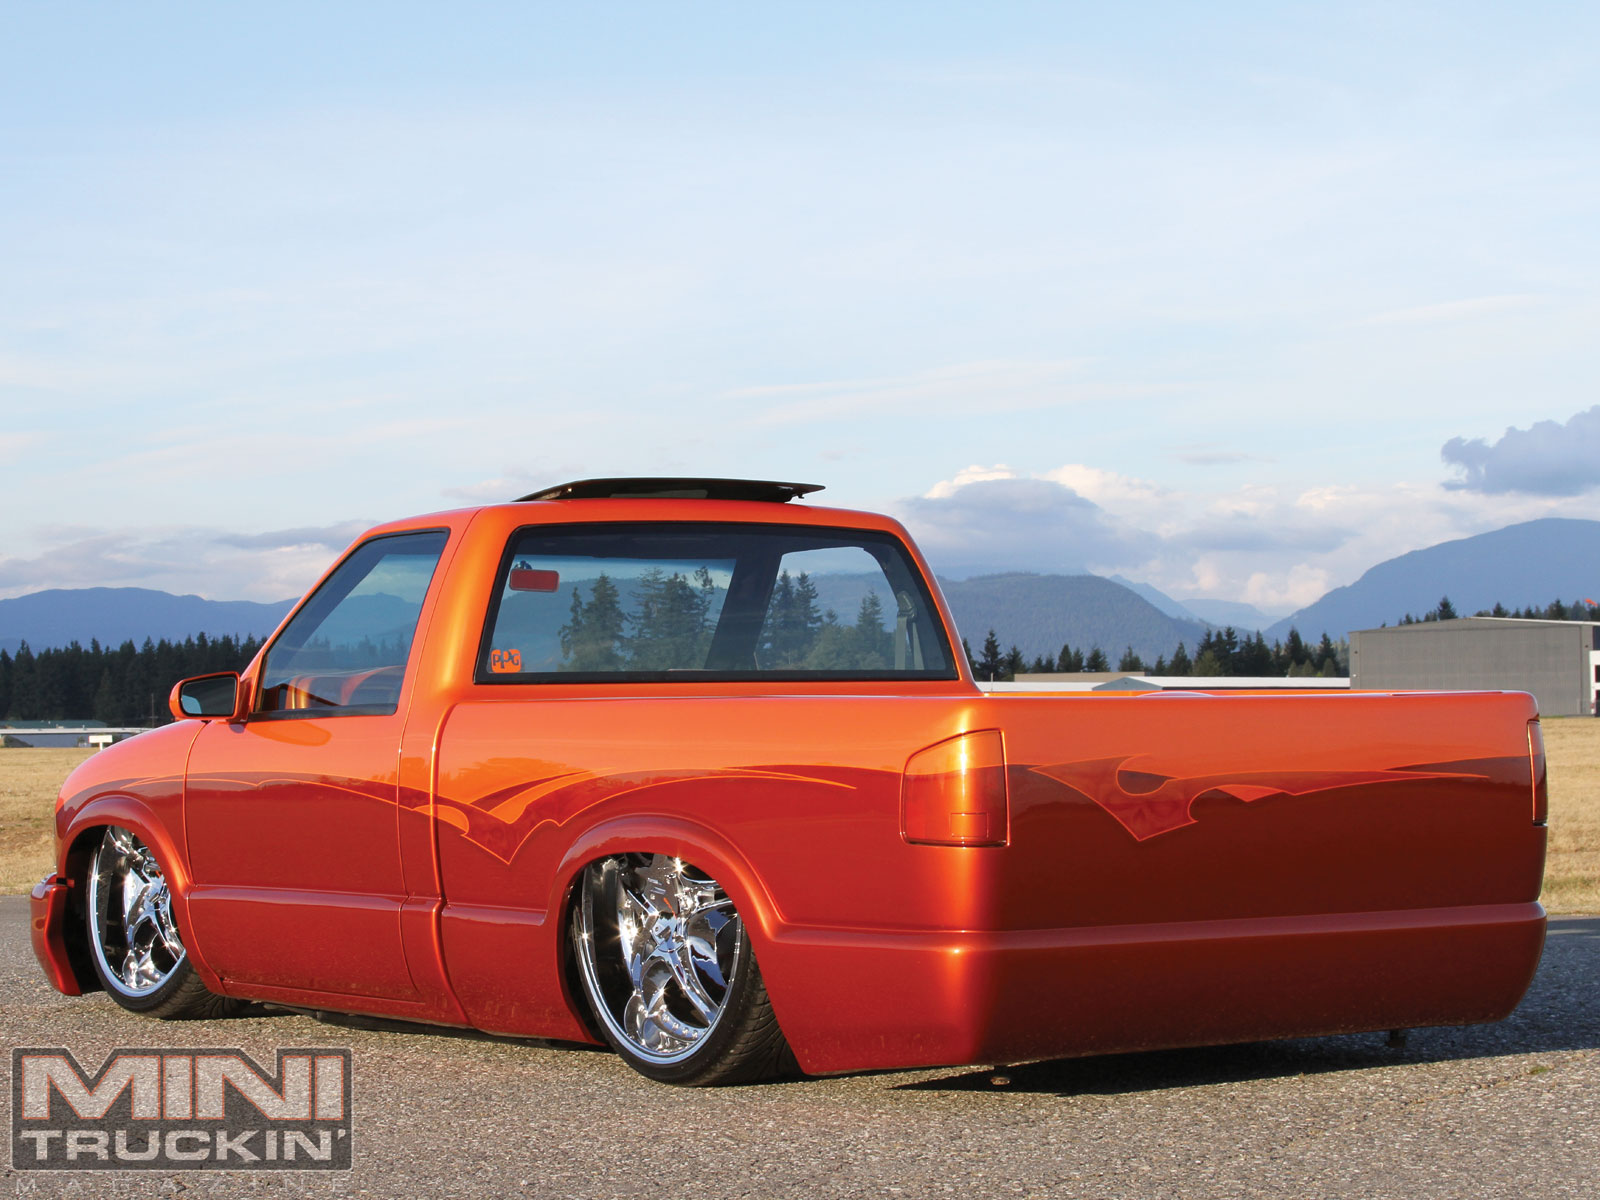 Free download 2011 Chevy S10 submited image [1600x1200] for your Desktop, Mobile & Tablet. Explore Mini Truckin Wallpaper. Truckin Wallpaper, Truckin Magazine Wallpaper